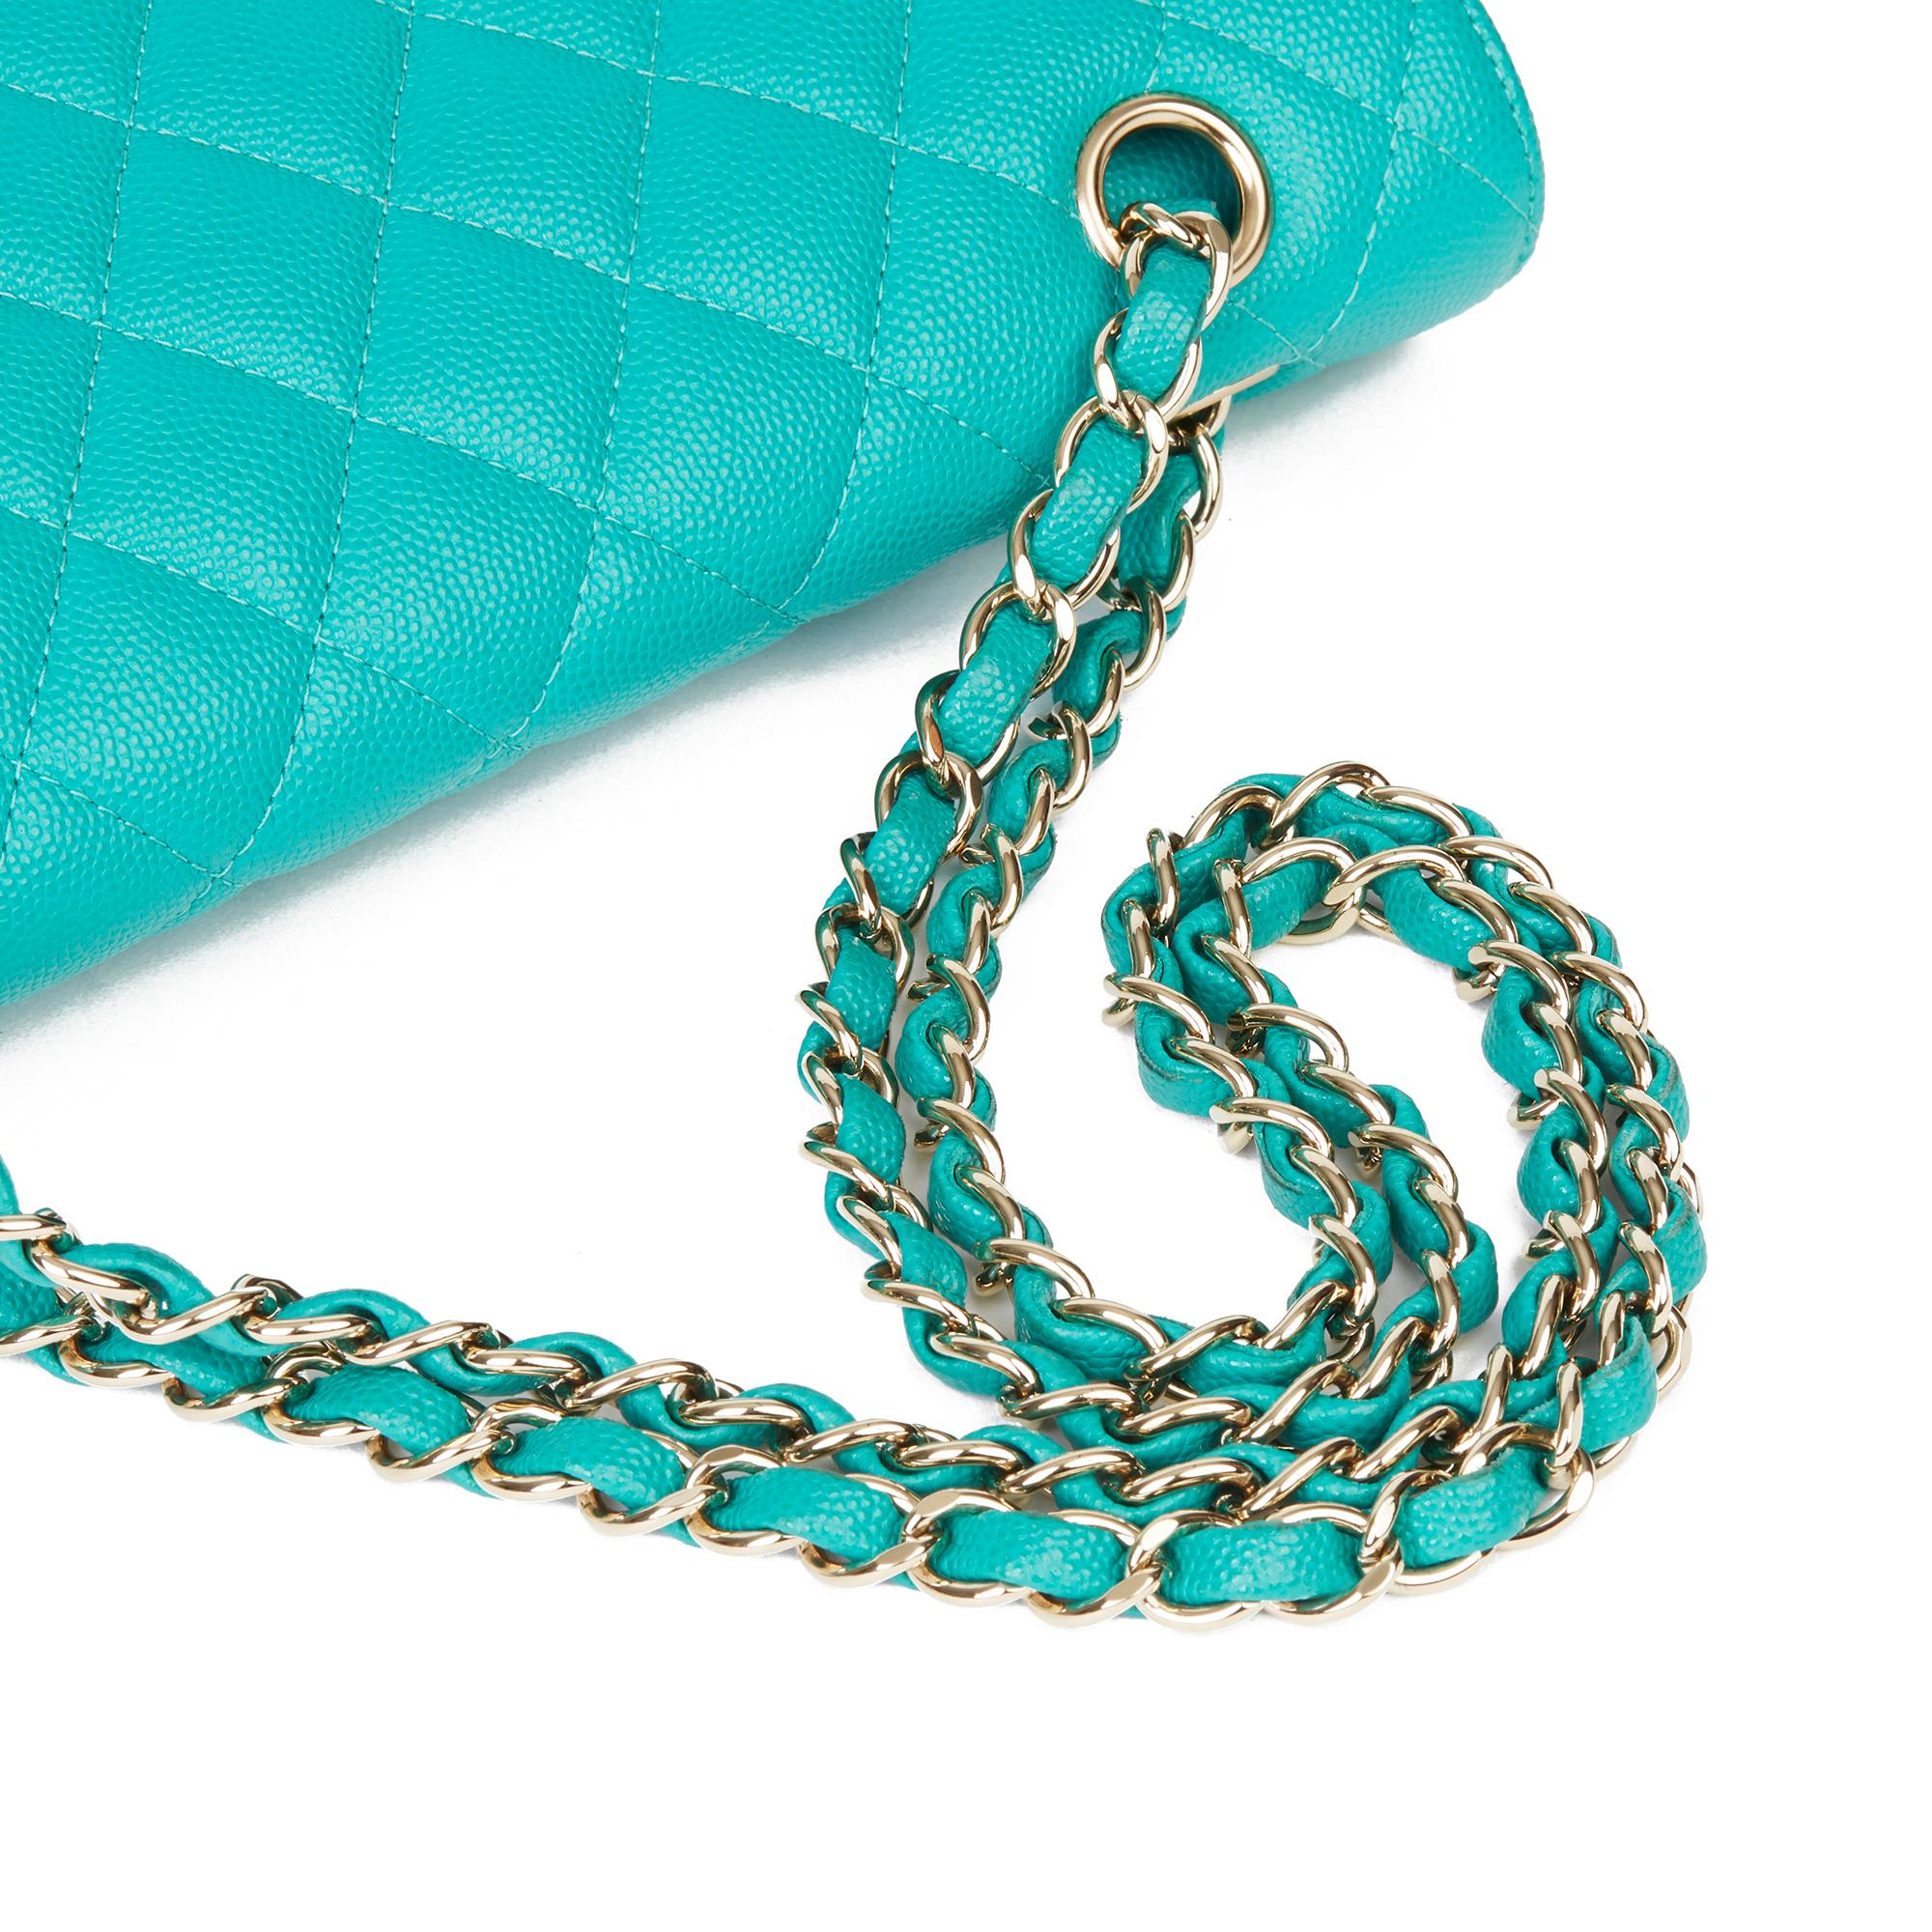 2017 Chanel Turquoise Quilted Caviar Leather Medium Classic Double Flap Bag In Excellent Condition In Bishop's Stortford, Hertfordshire